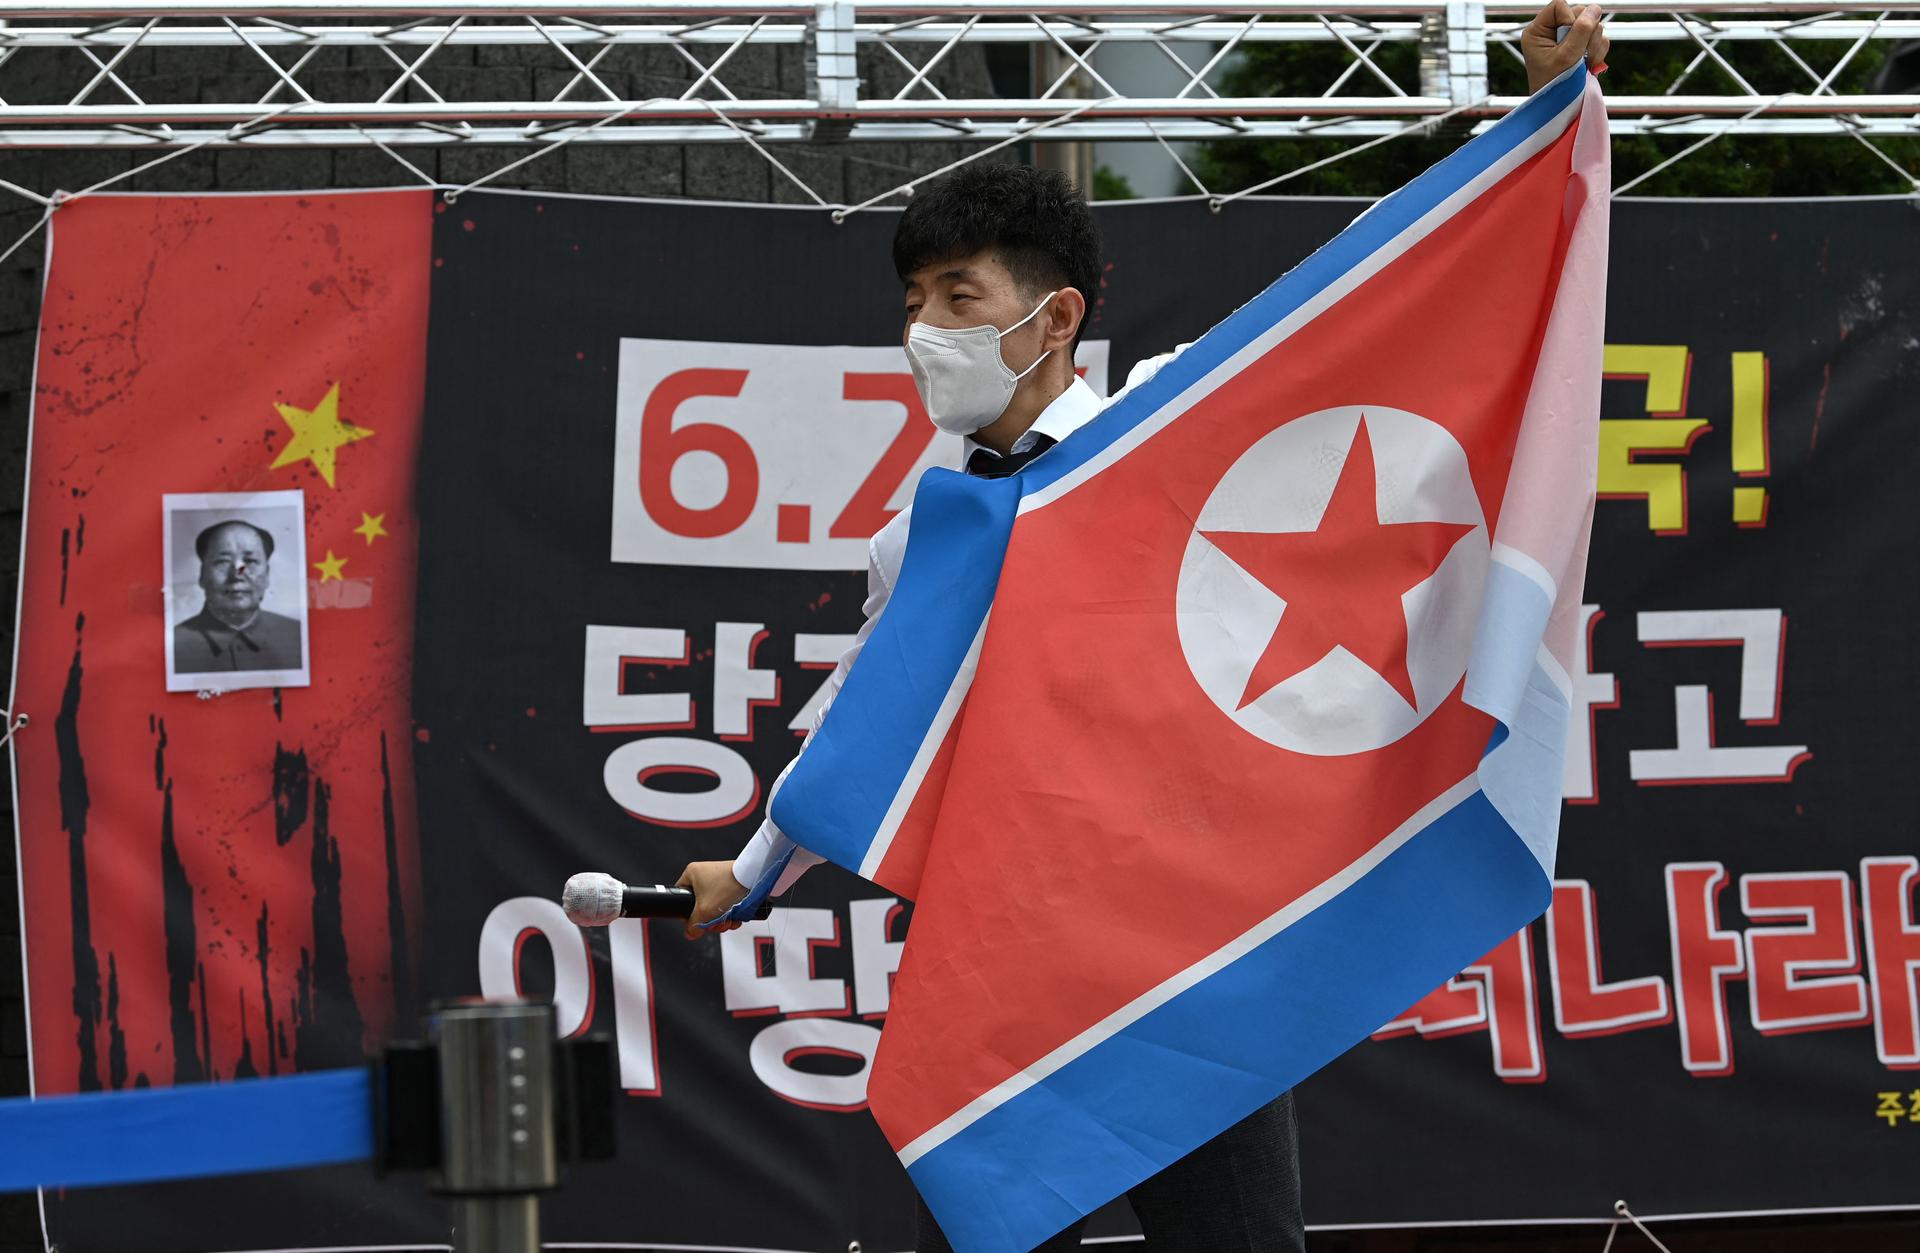 Much of the disinformation trafficked in South Korea involves nationalistic anti-Communist narratives similar to this protester’s anti-North Korea message. 